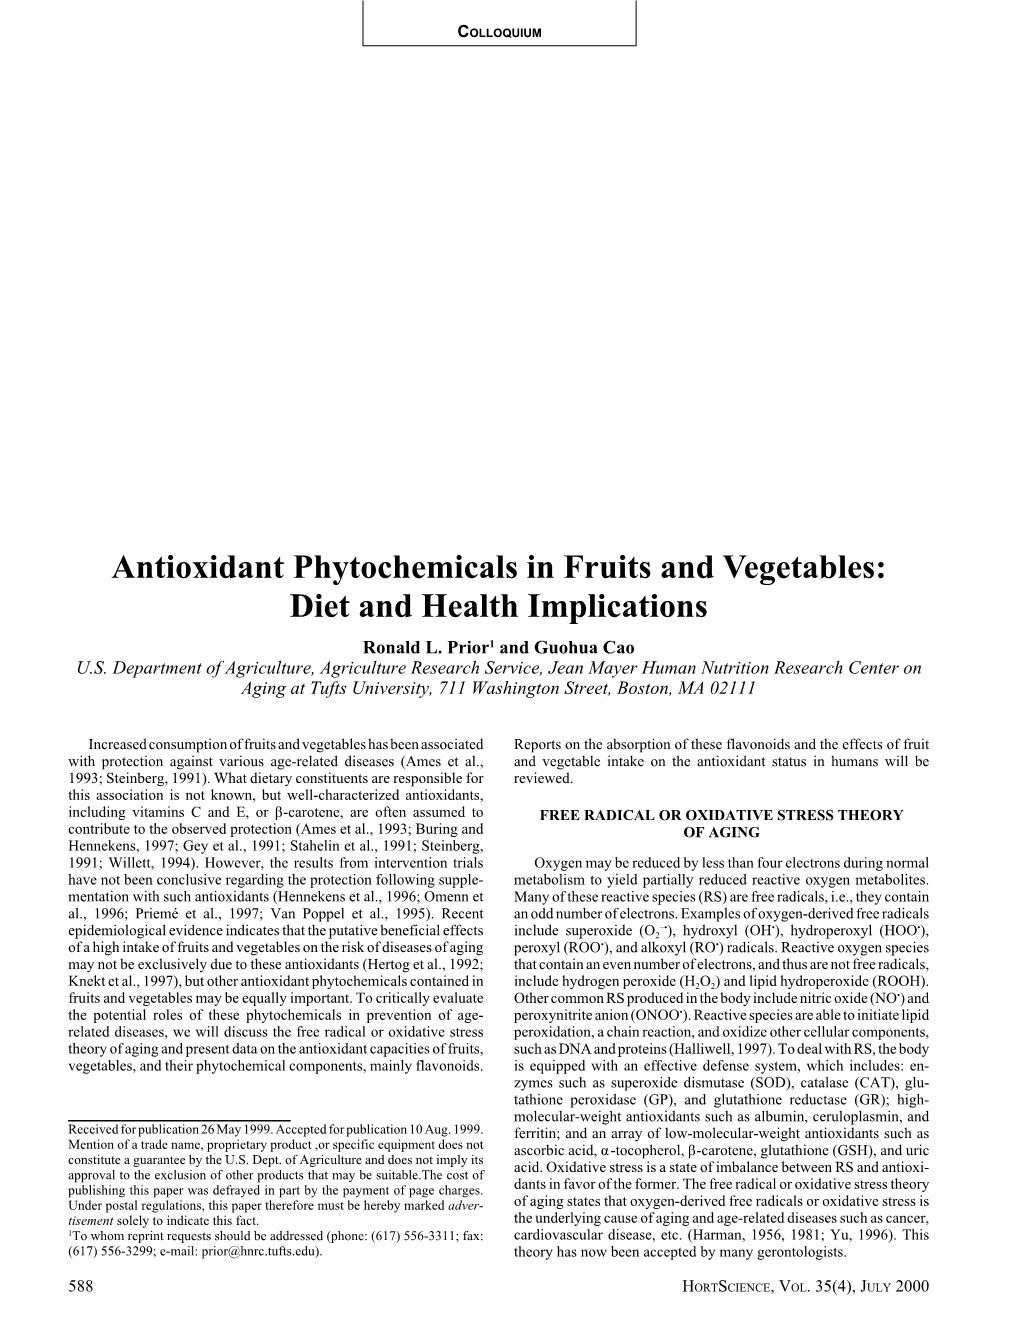 Antioxidant Phytochemicals in Fruits and Vegetables: Diet and Health Implications Ronald L